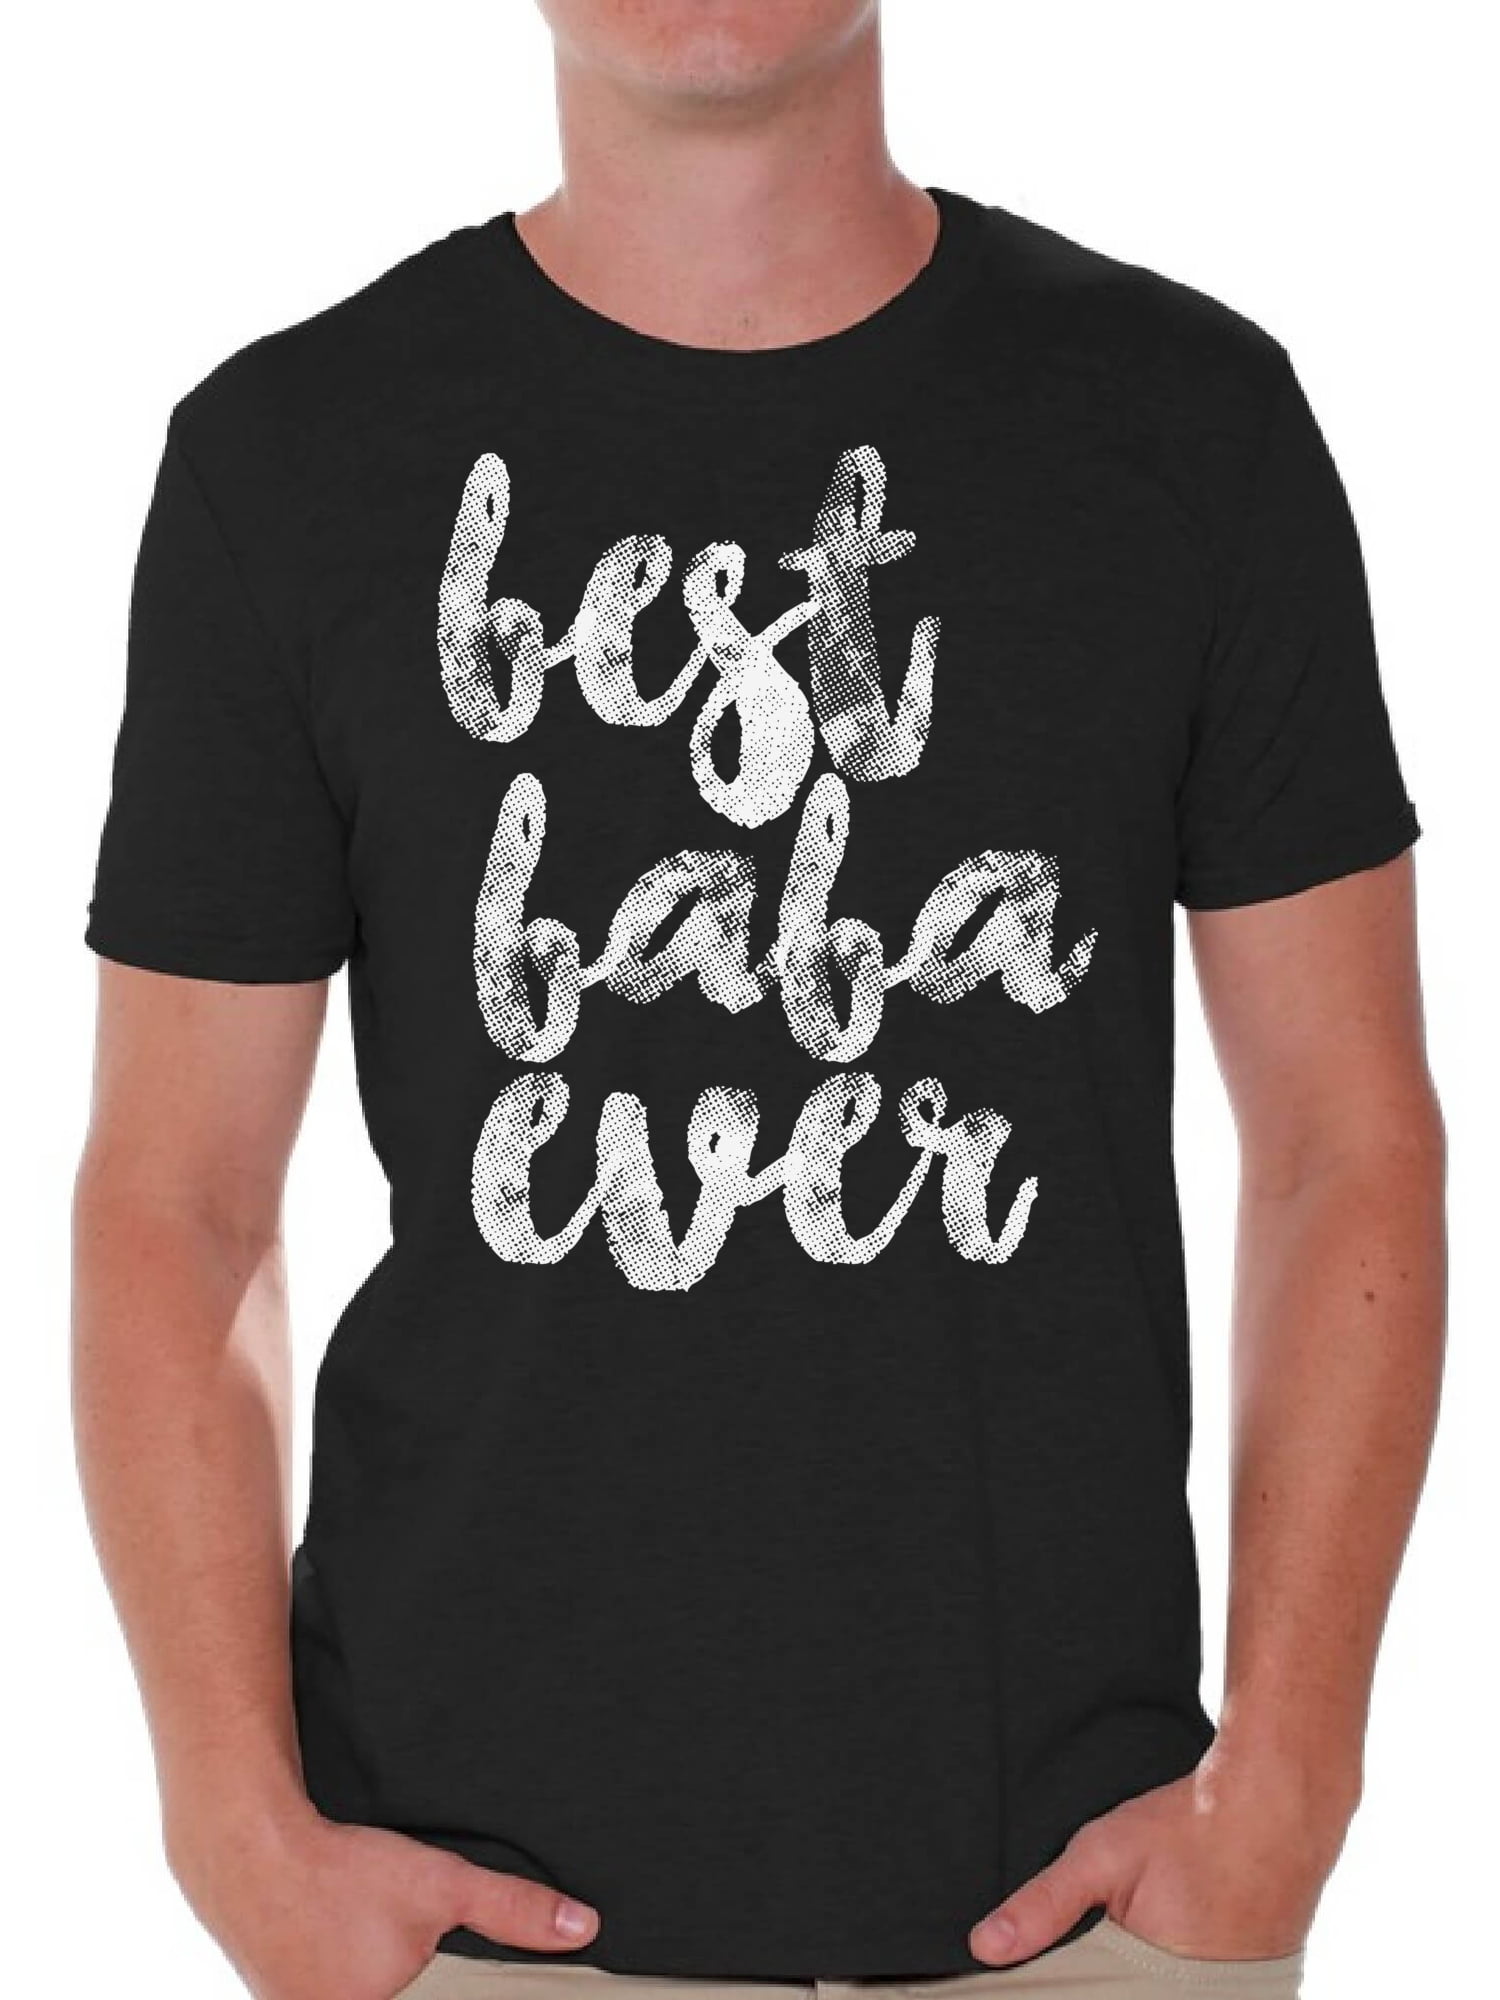 Fathers Day Clothes. Best Baba Ever Gifts Fathers Tank Top Best Father Men Tank Top Baba Tank Top Best Baba Tank Top